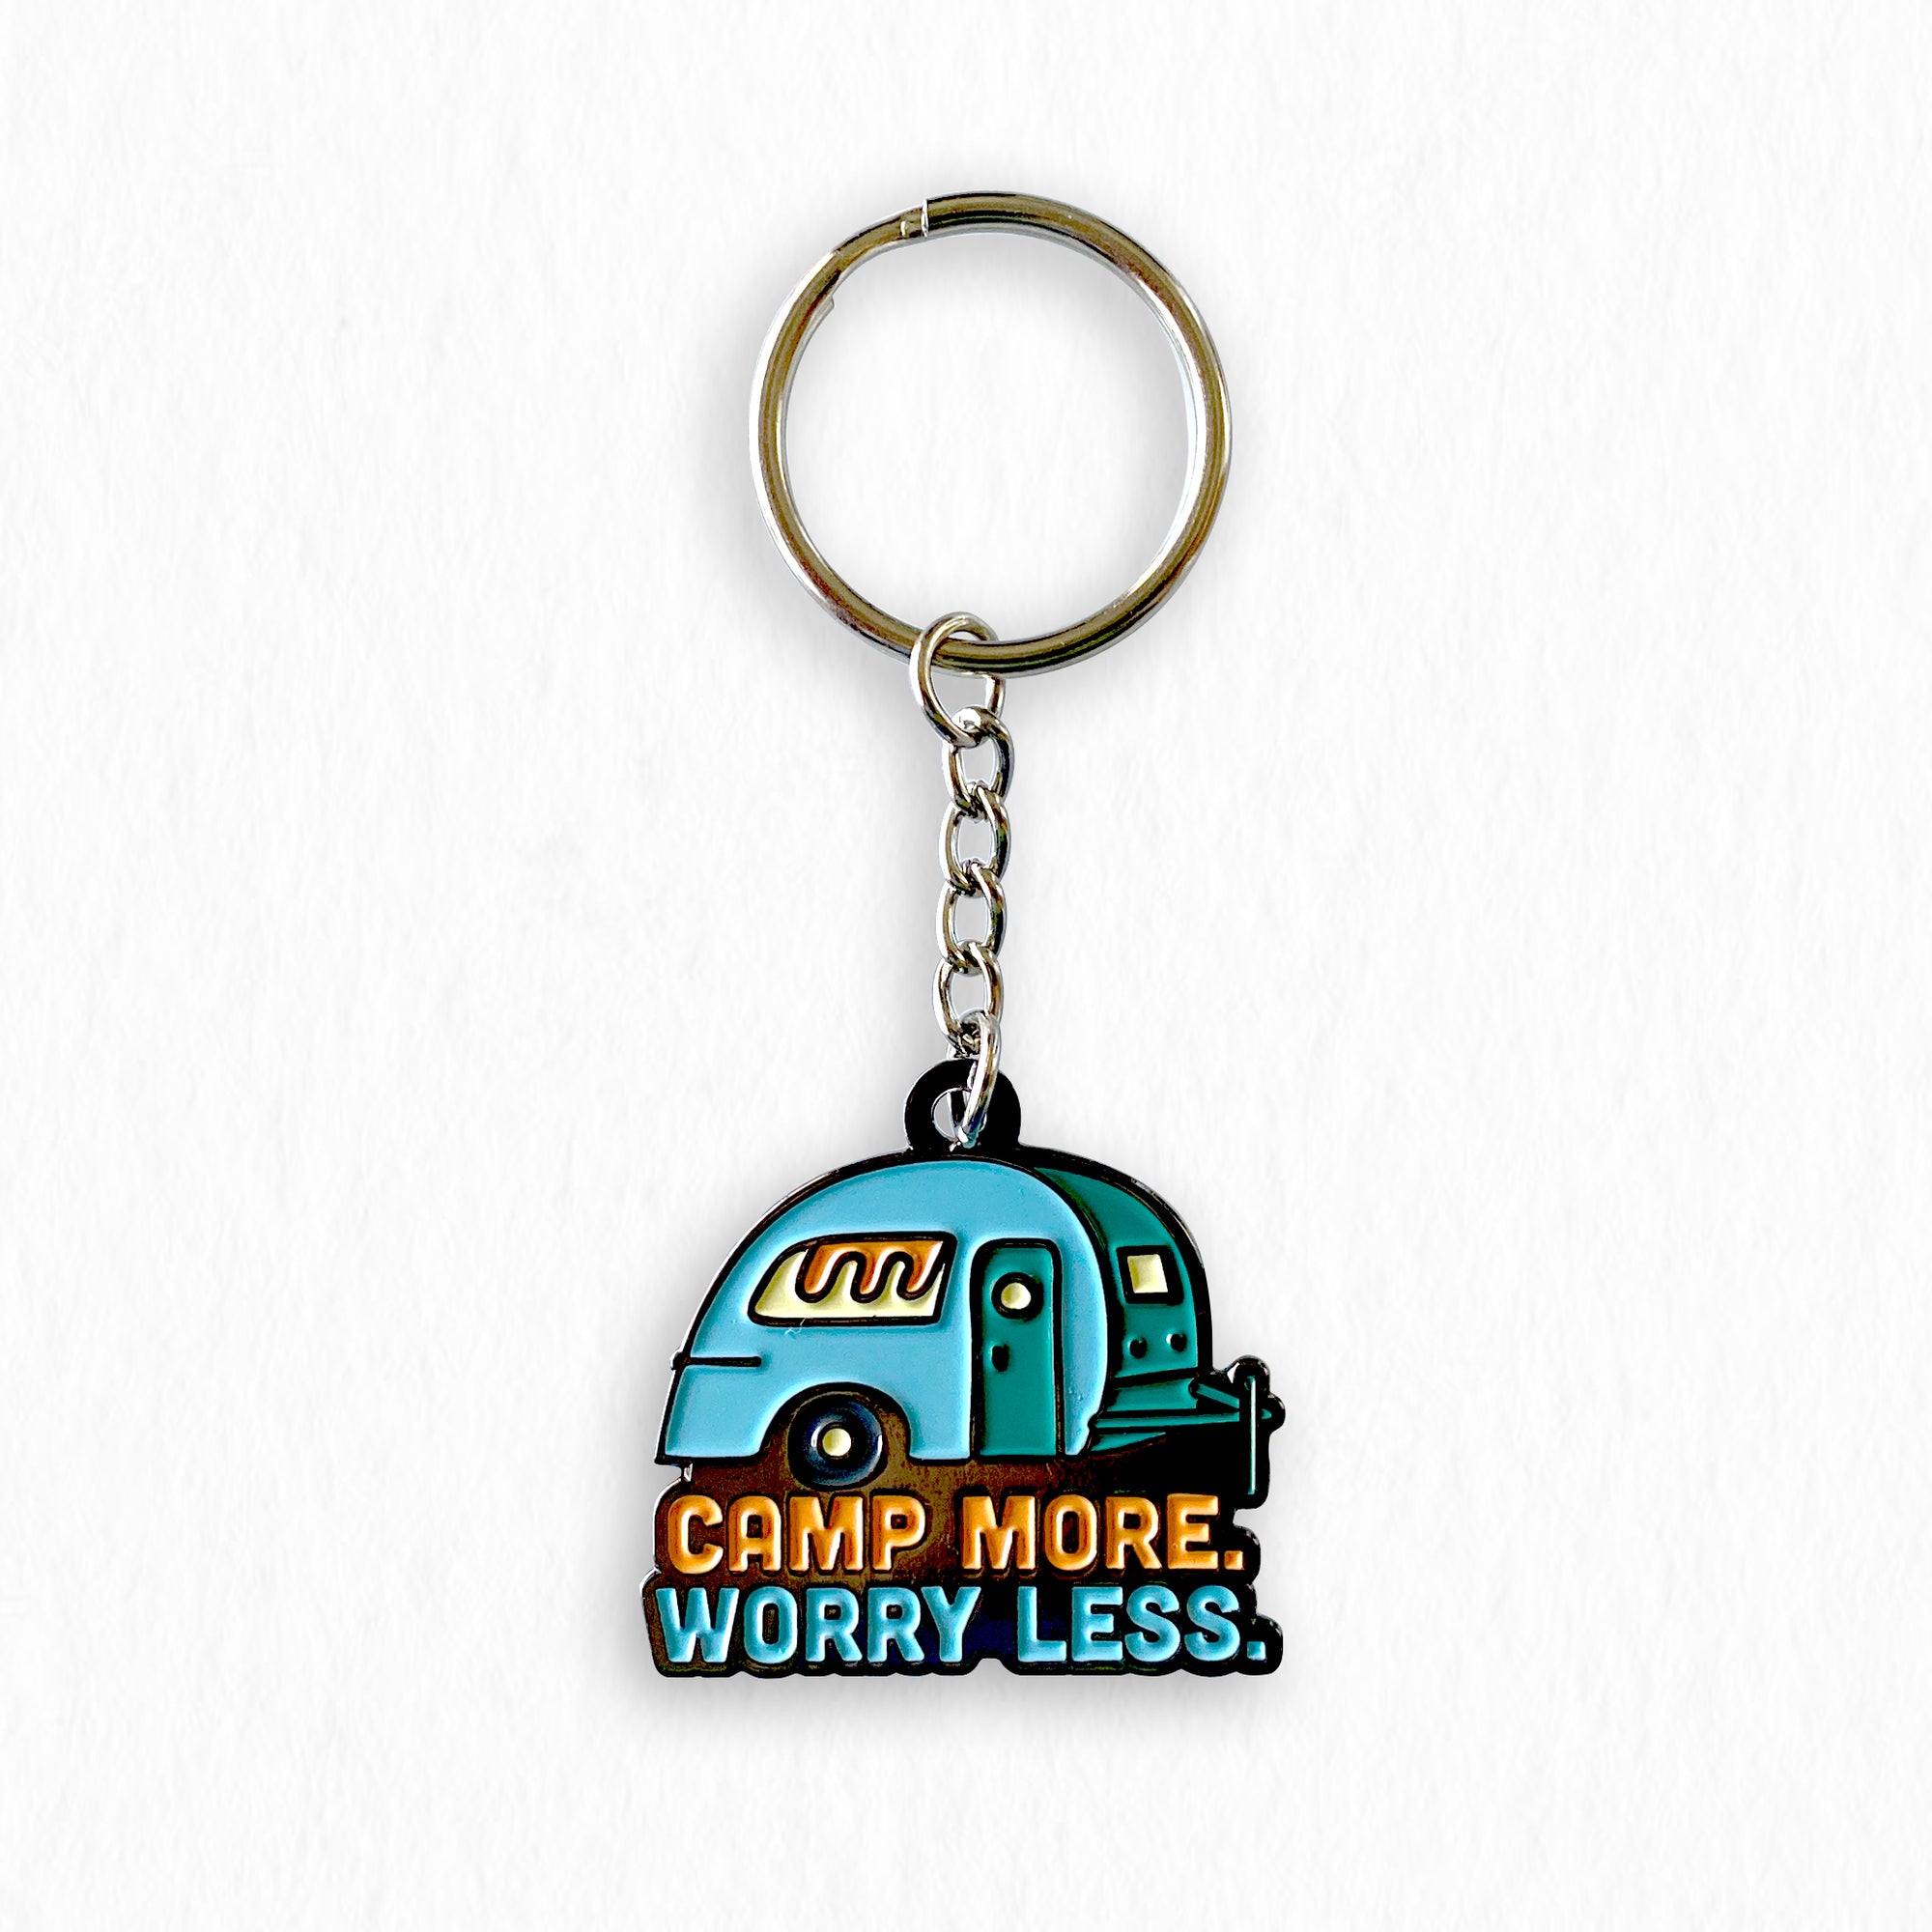 Camp More. Worry Less. Trailer keychain. Hanging on a white wall.